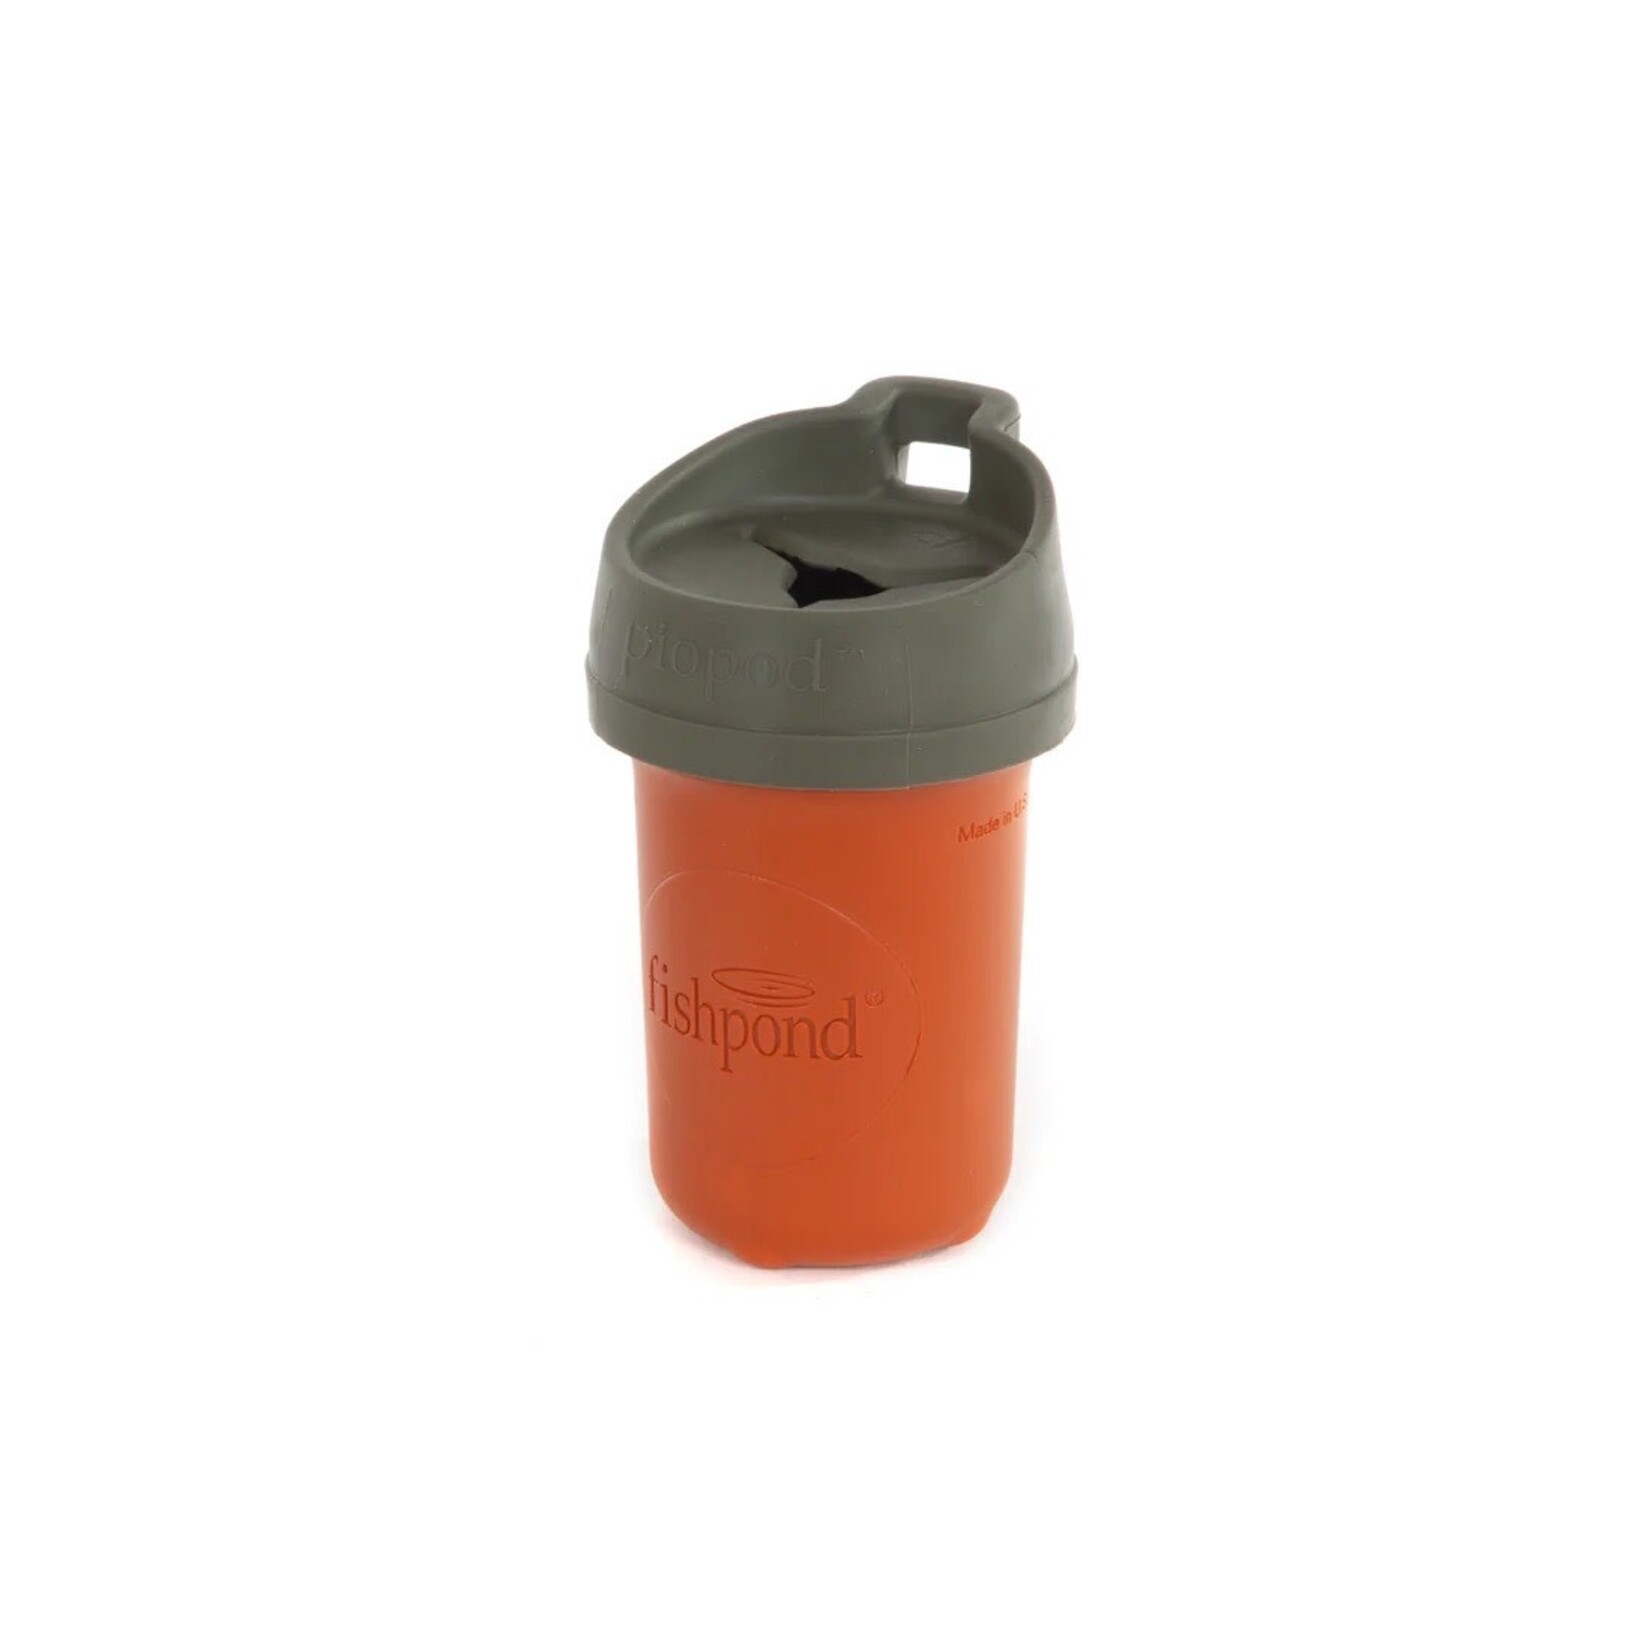 Fishpond piopod Micro-Trash Container -